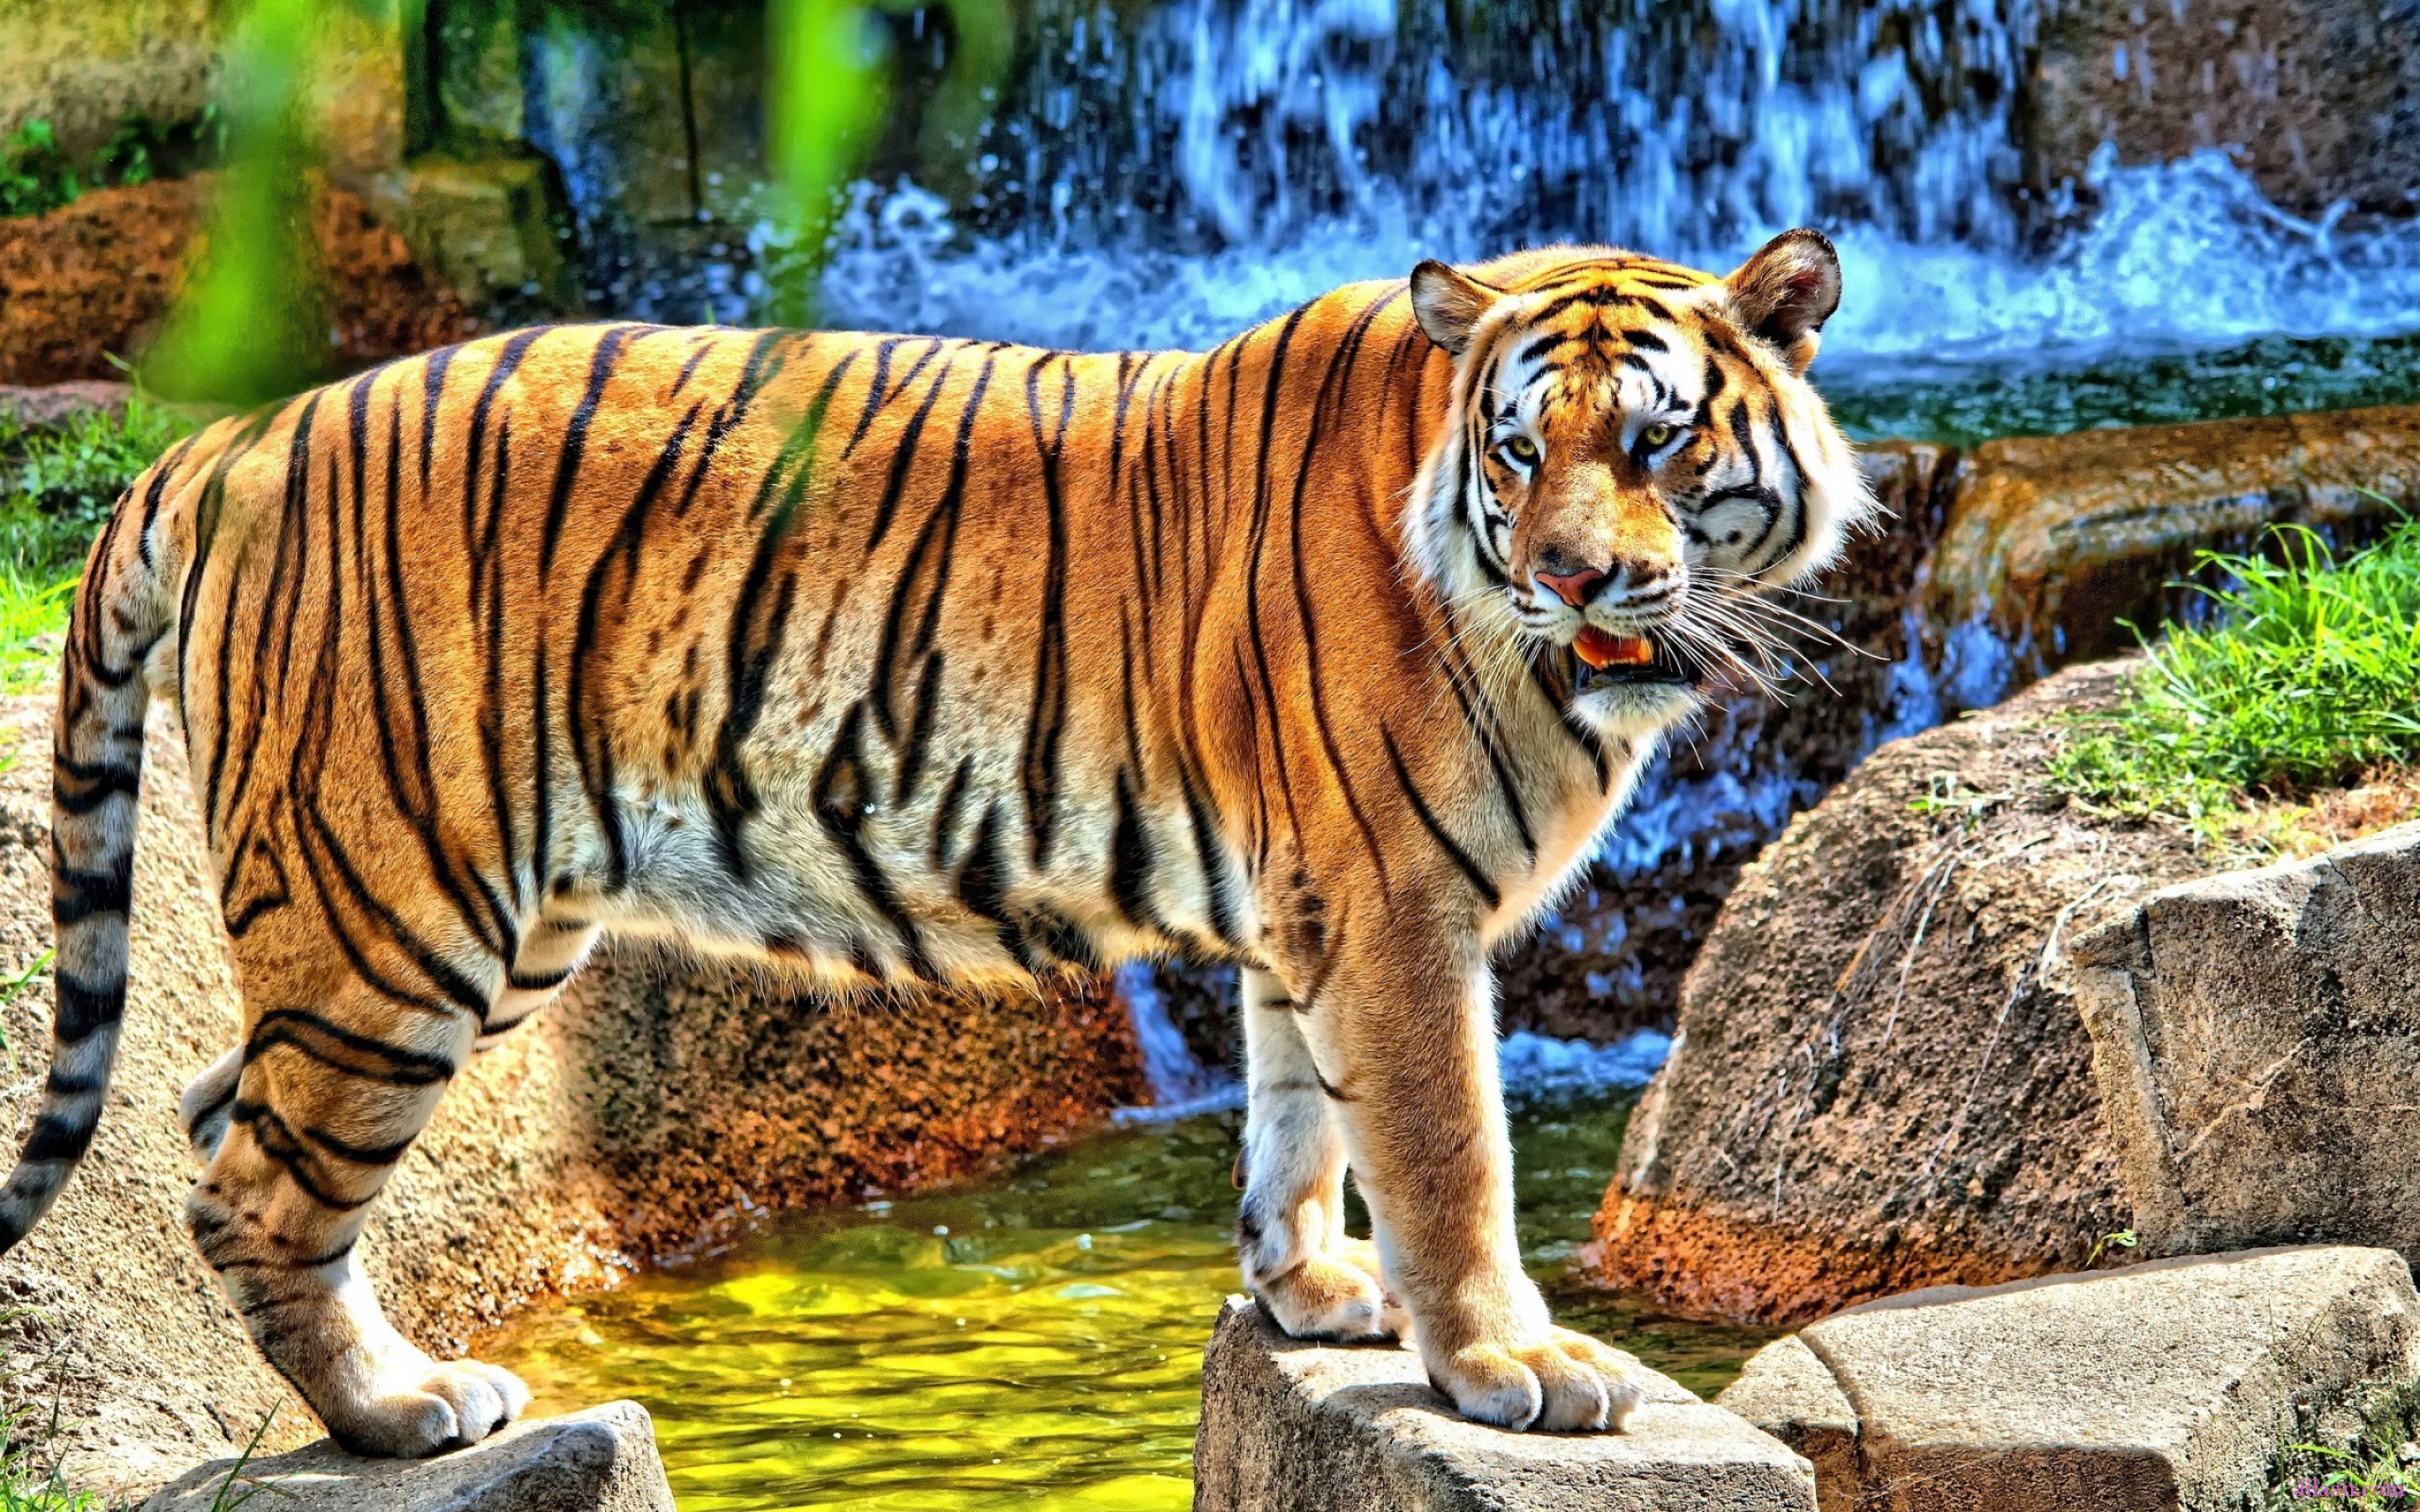 Tiger widescreen 16:9 wallpapers hd, desktop backgrounds 1600x900, images  and pictures